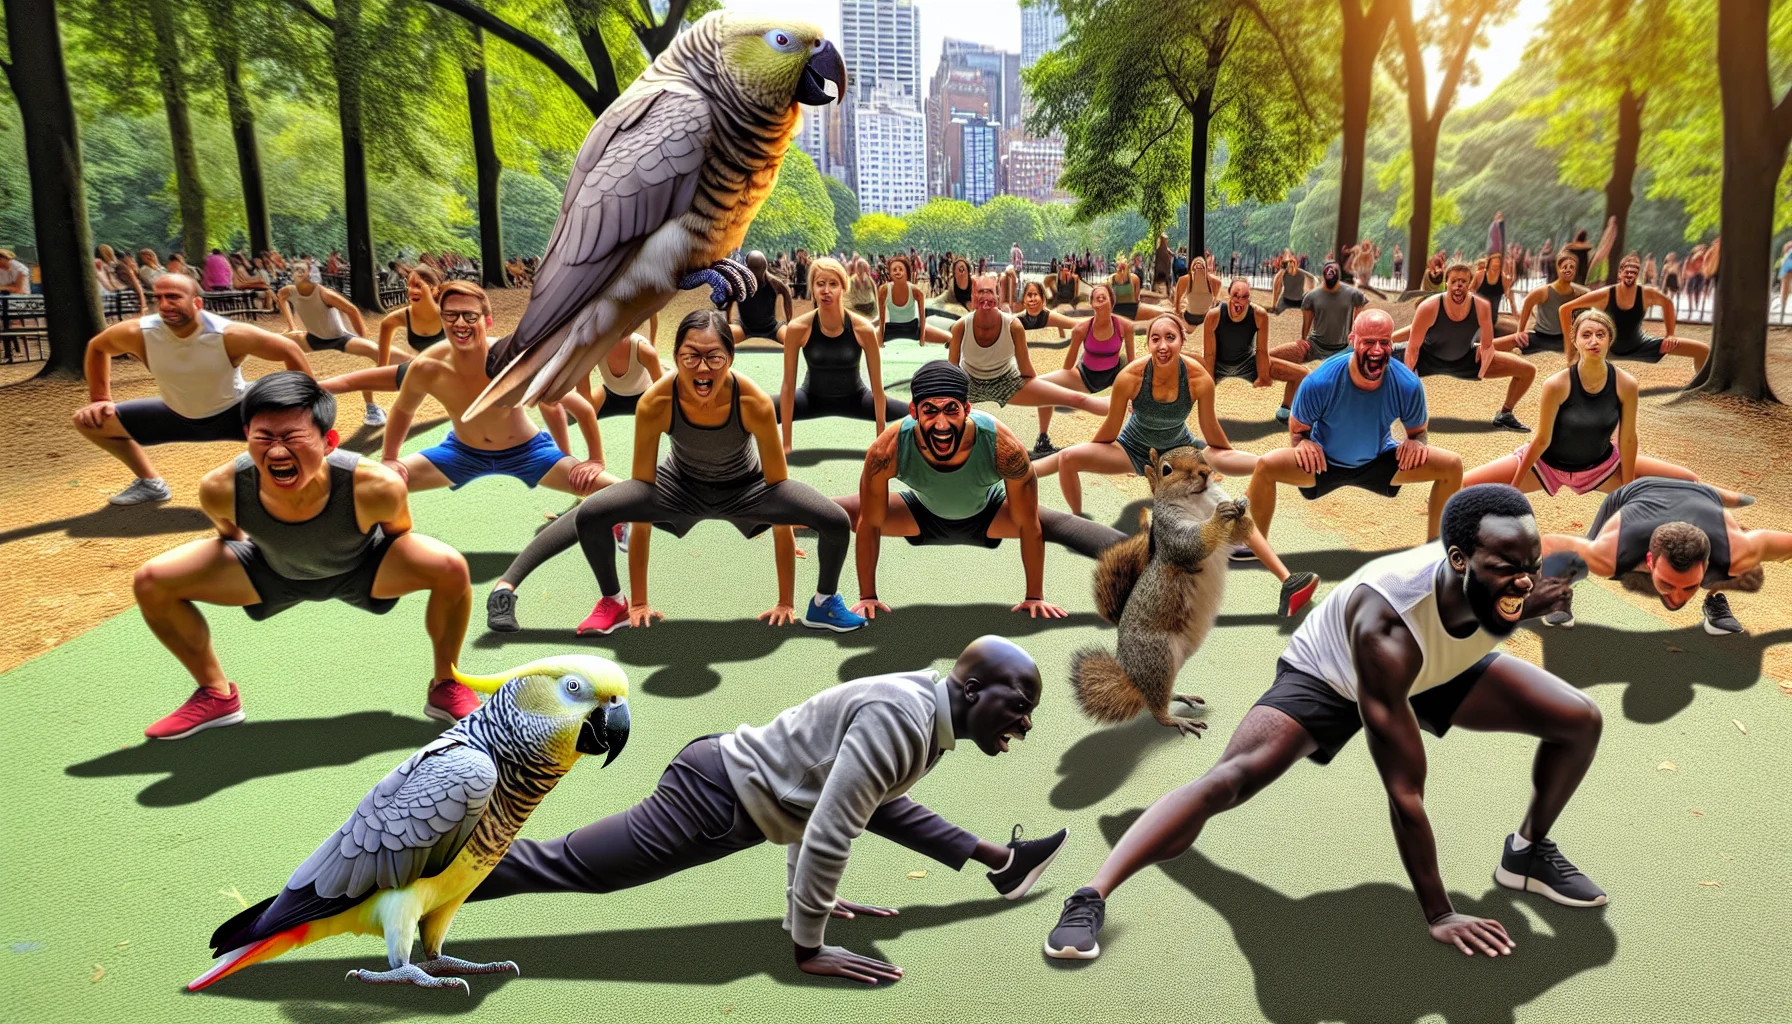 Generate an amusing, realistic image that promotes physical fitness. Show a diverse group of people from different races such as Asian, Black, White, Hispanic, and Middle-Eastern engaging in calisthenics exercises in a park. Capture the dynamic movements as they hilariously struggle to perform splits. Use surprise elements such as a cockatoo squawking encouragement from a low branch or a squirrel running off with someone's protein bar to create a comedic atmosphere. Make sure the image highlights the enjoyment and camaraderie of group exercise, motivating viewers to participate.